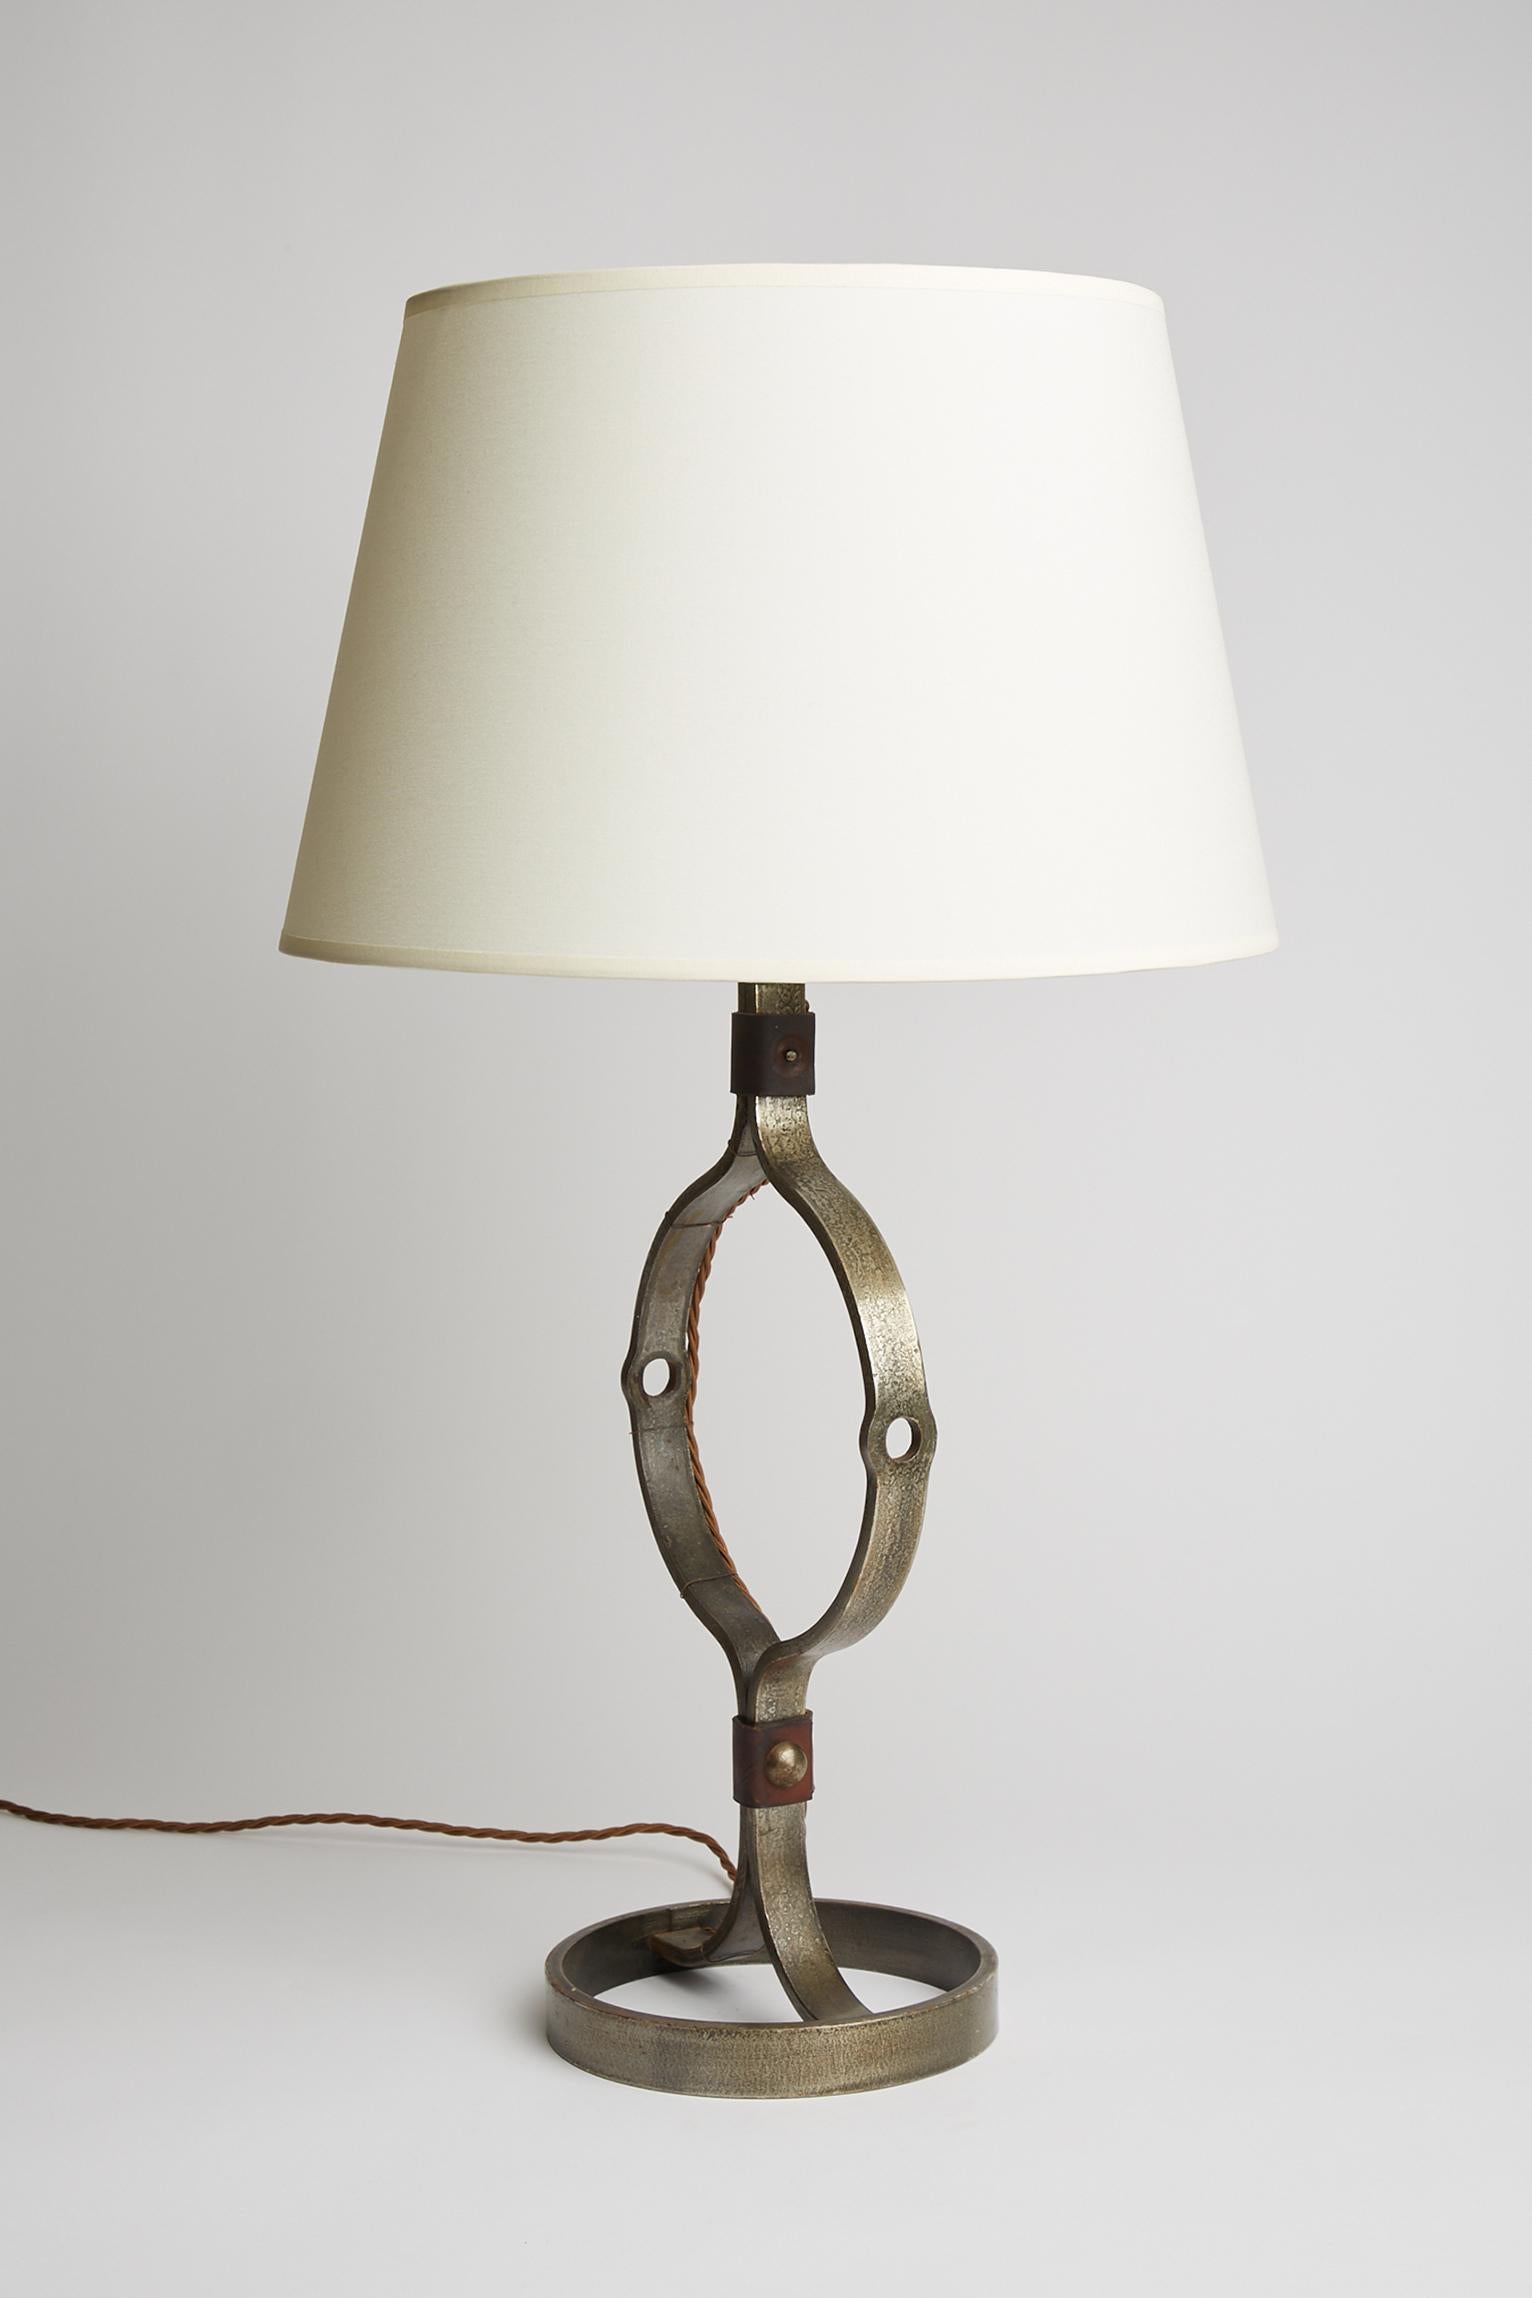 20th Century Mid-Century Iron and Leather Table Lamp by Jean-Pierre Ryckaert For Sale